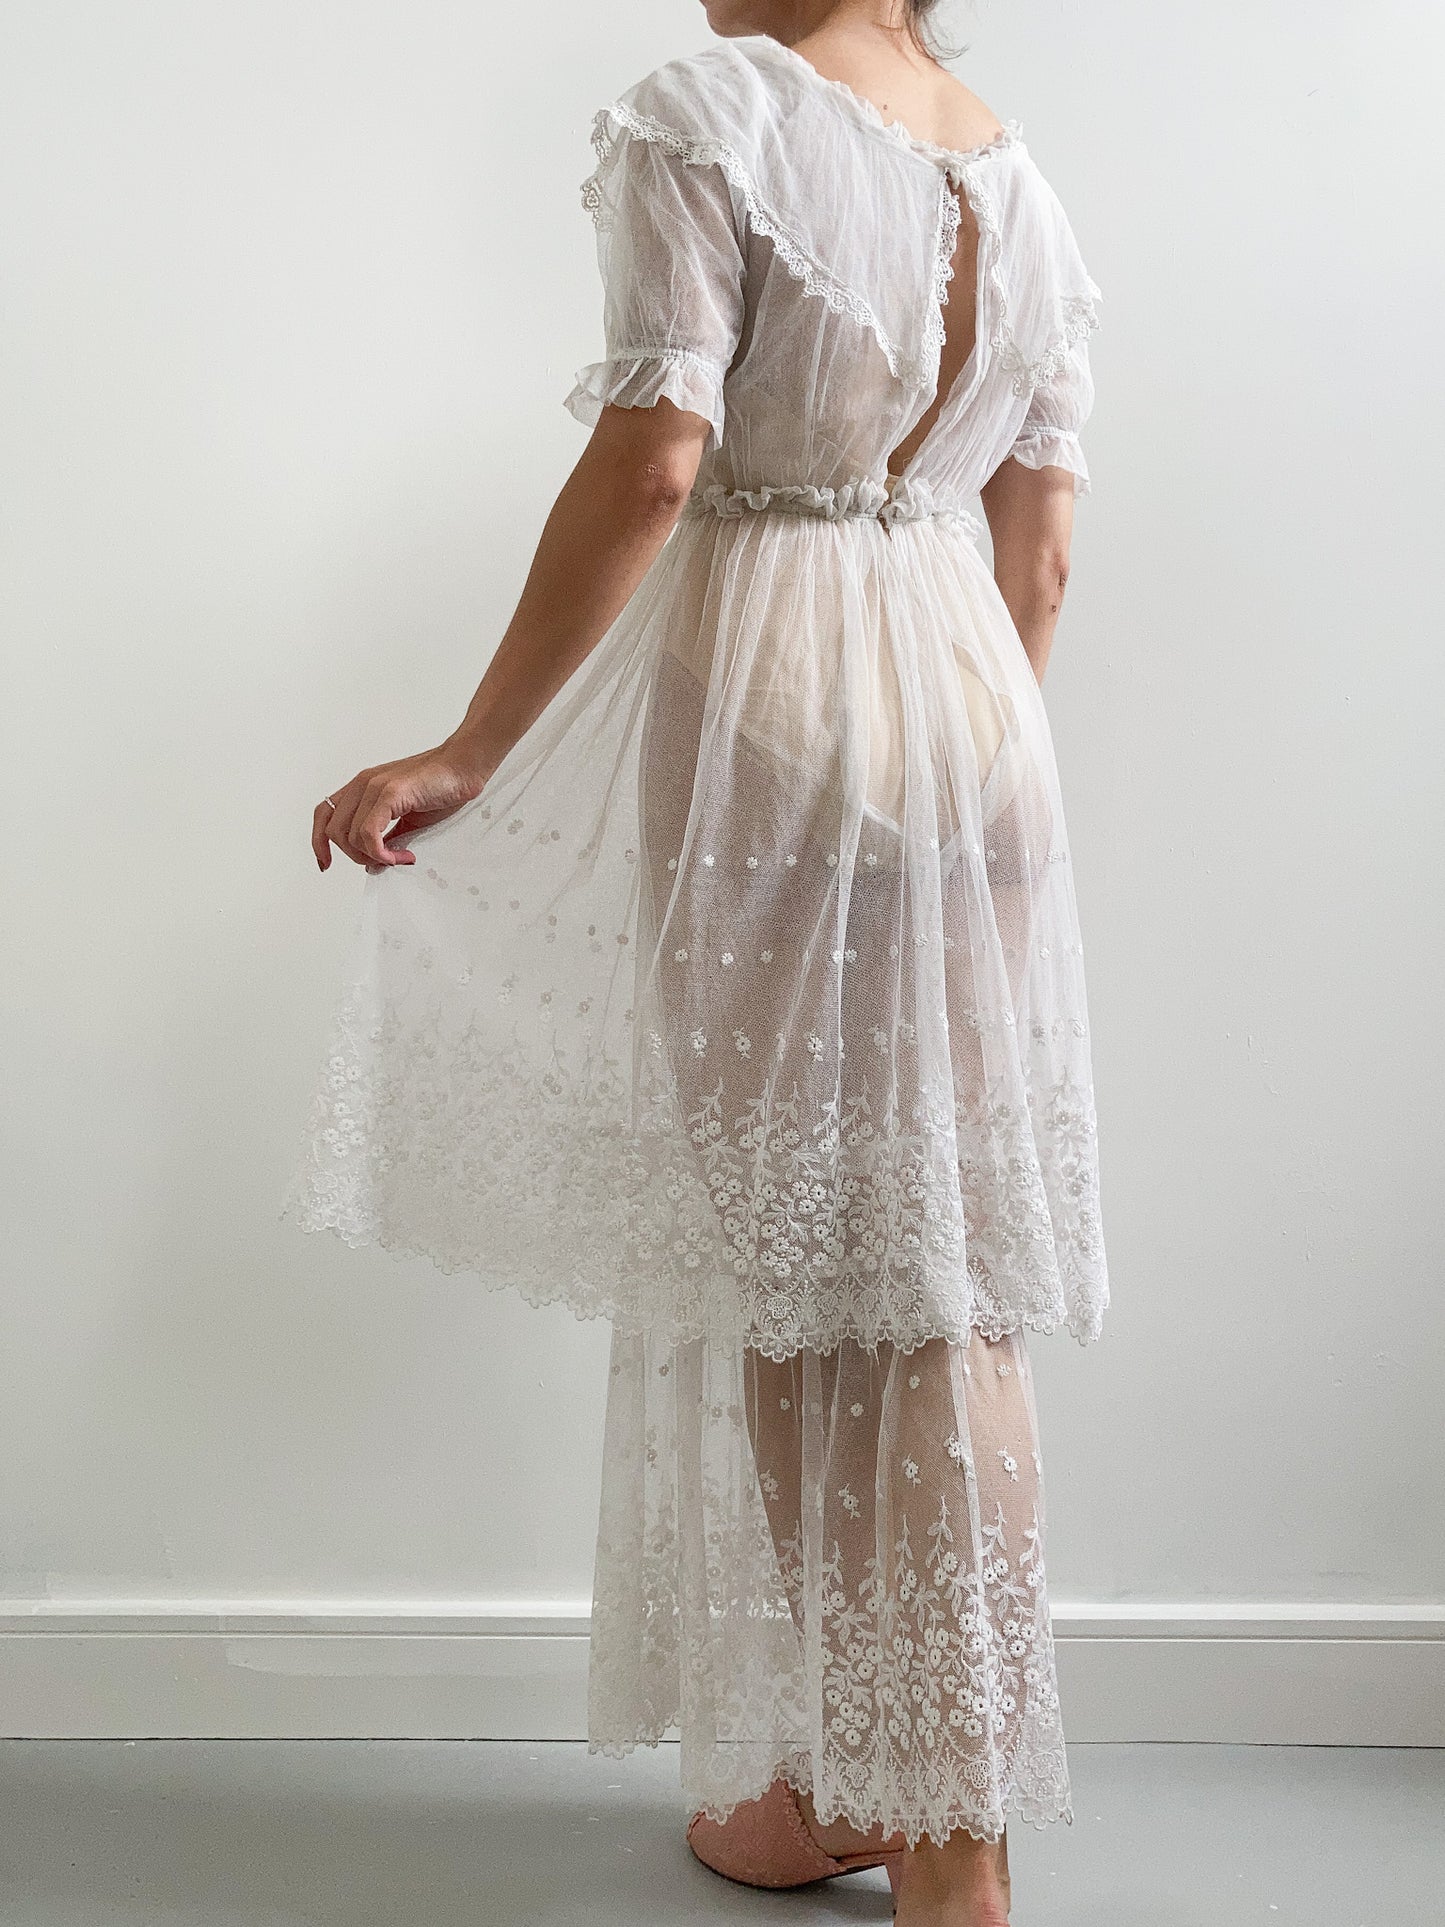 Antique Embroidered Net Tiered Wedding Dress with Collar